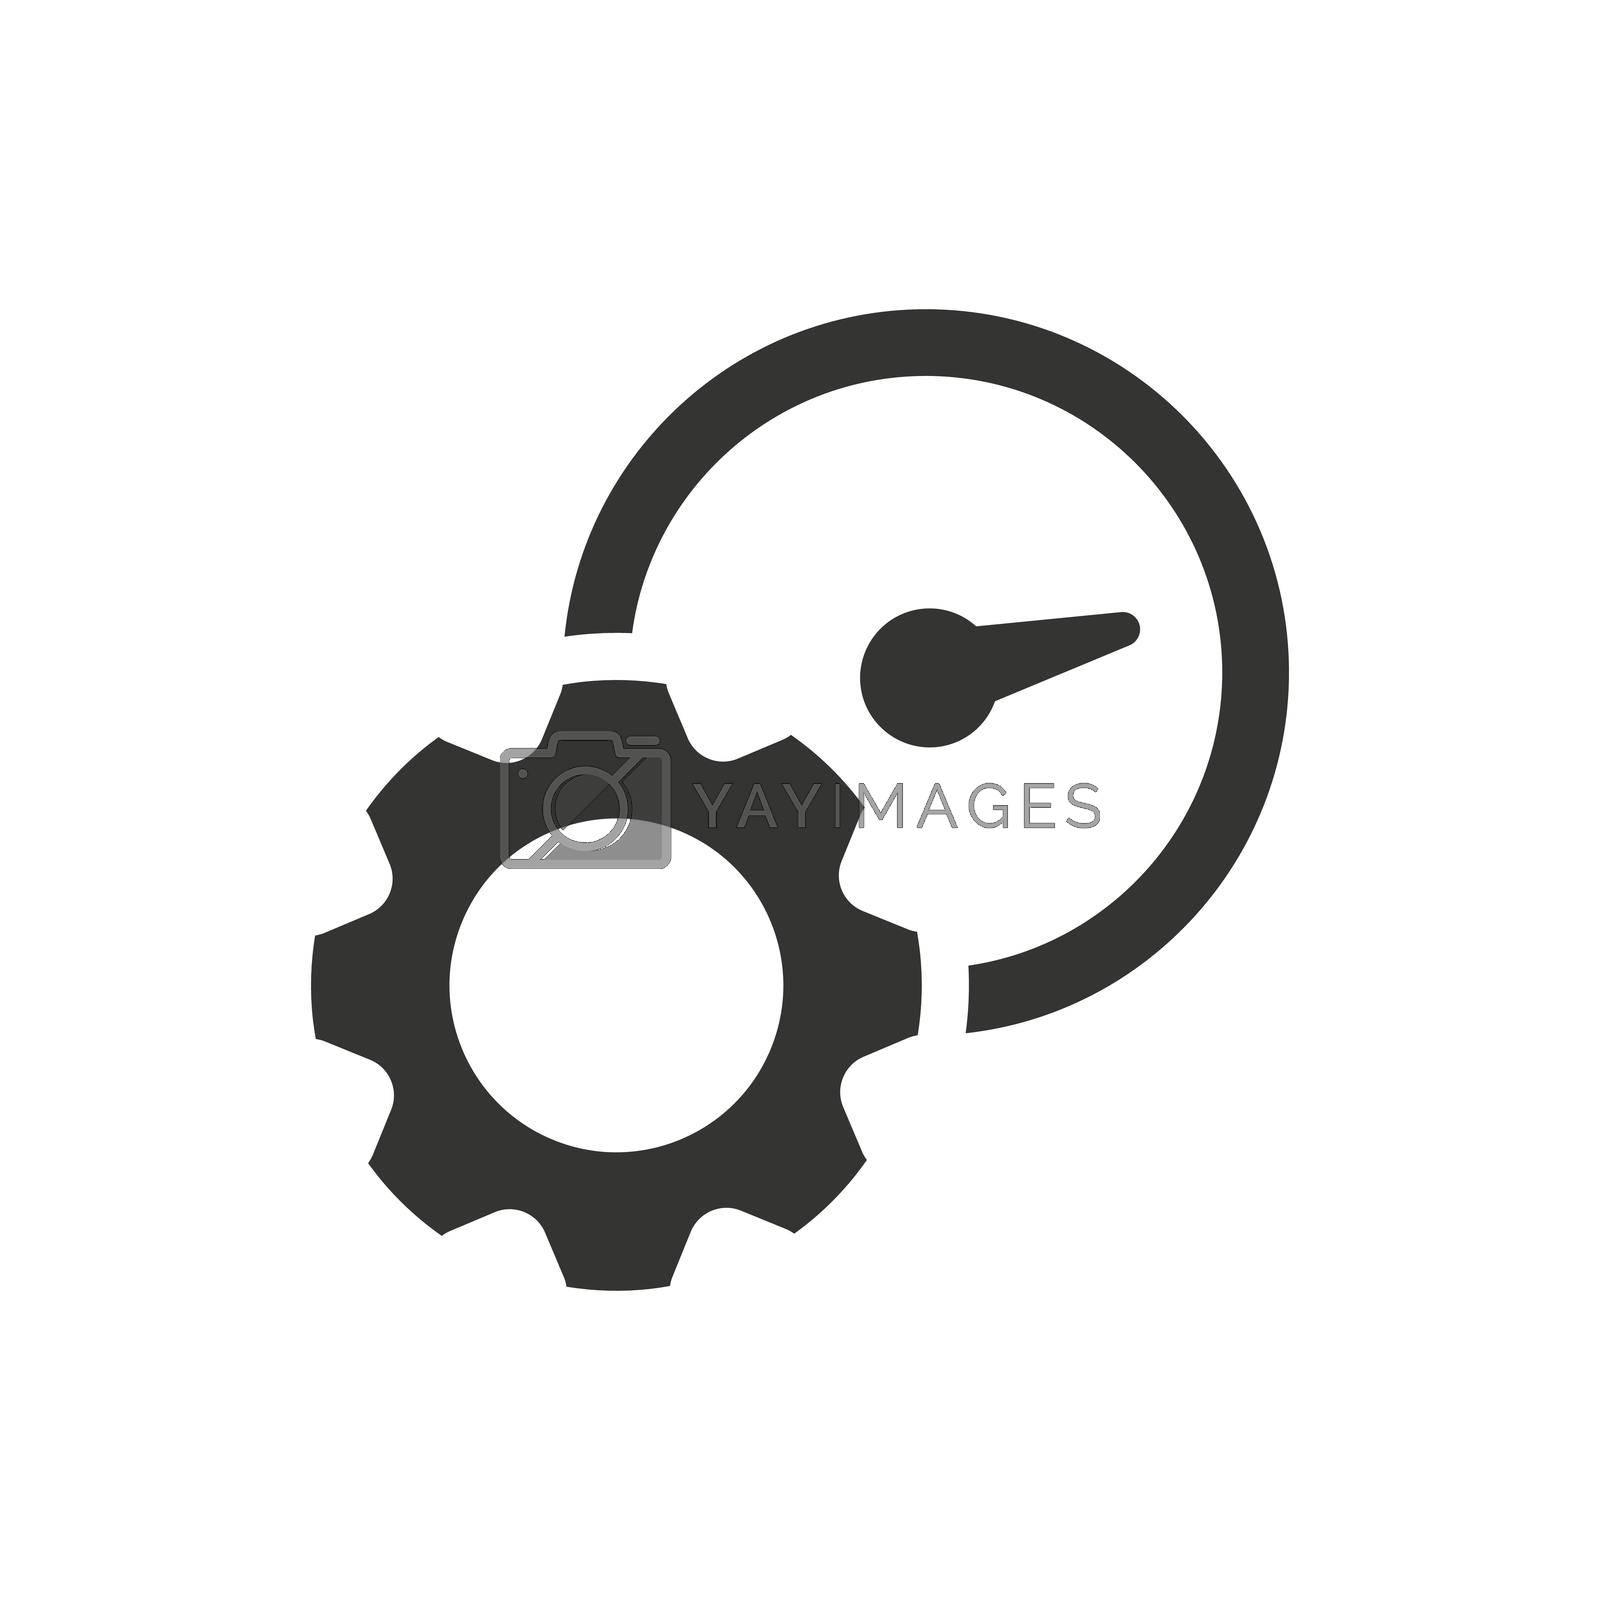 Royalty free image of Productivity Icon by delwar018